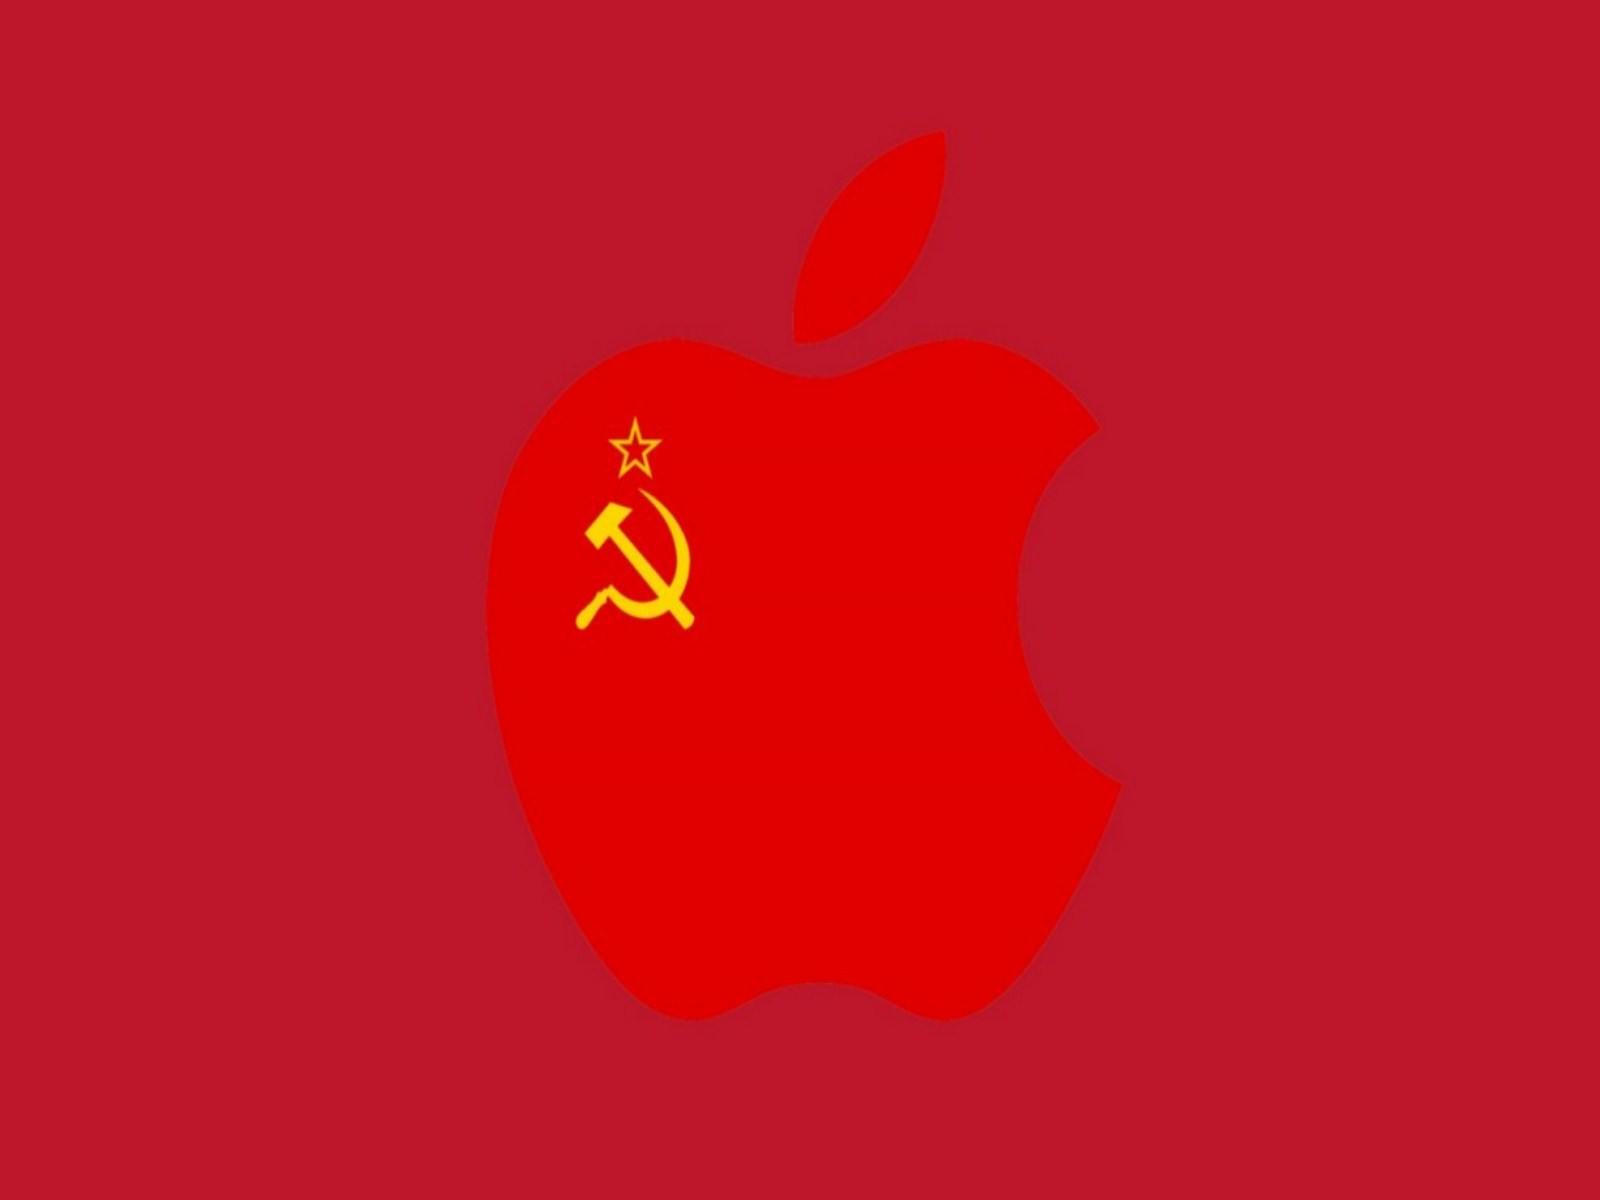 Red Mac Wallpaper The Munist Era iPhone And Background